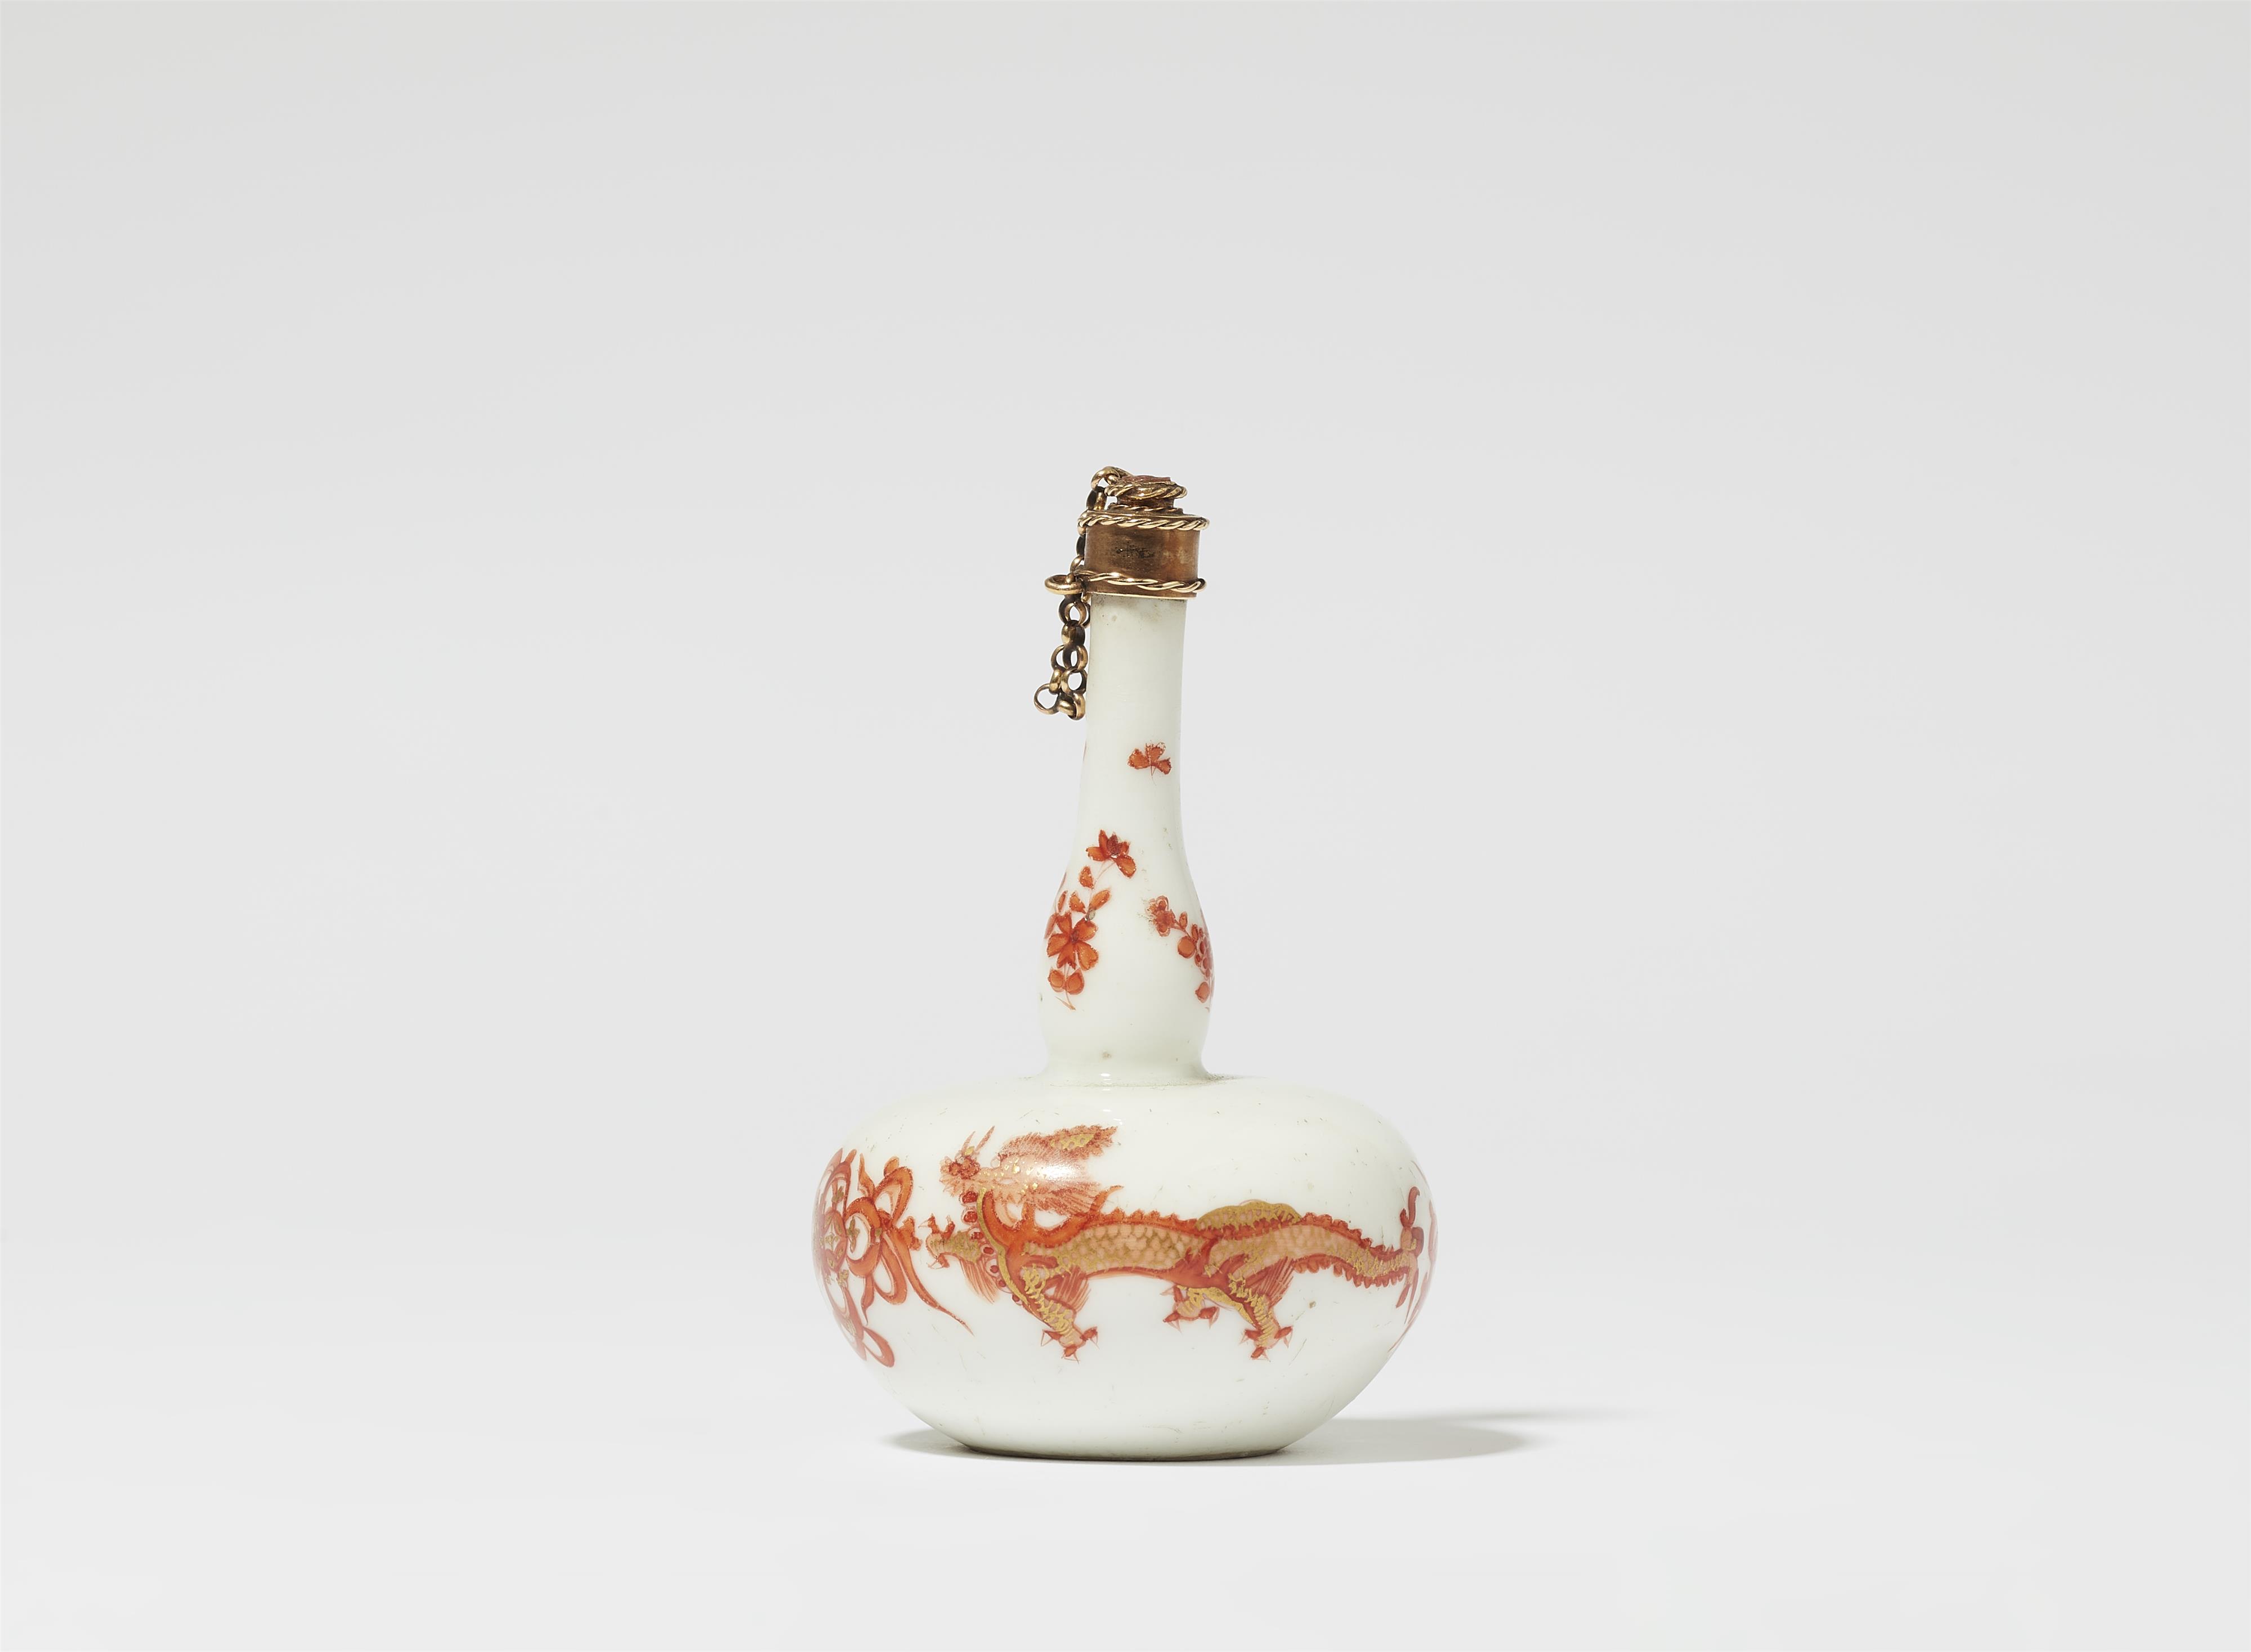 A miniature Meissen porcelain vase with red dragon motifs from the Royal Court Confectionery - image-1